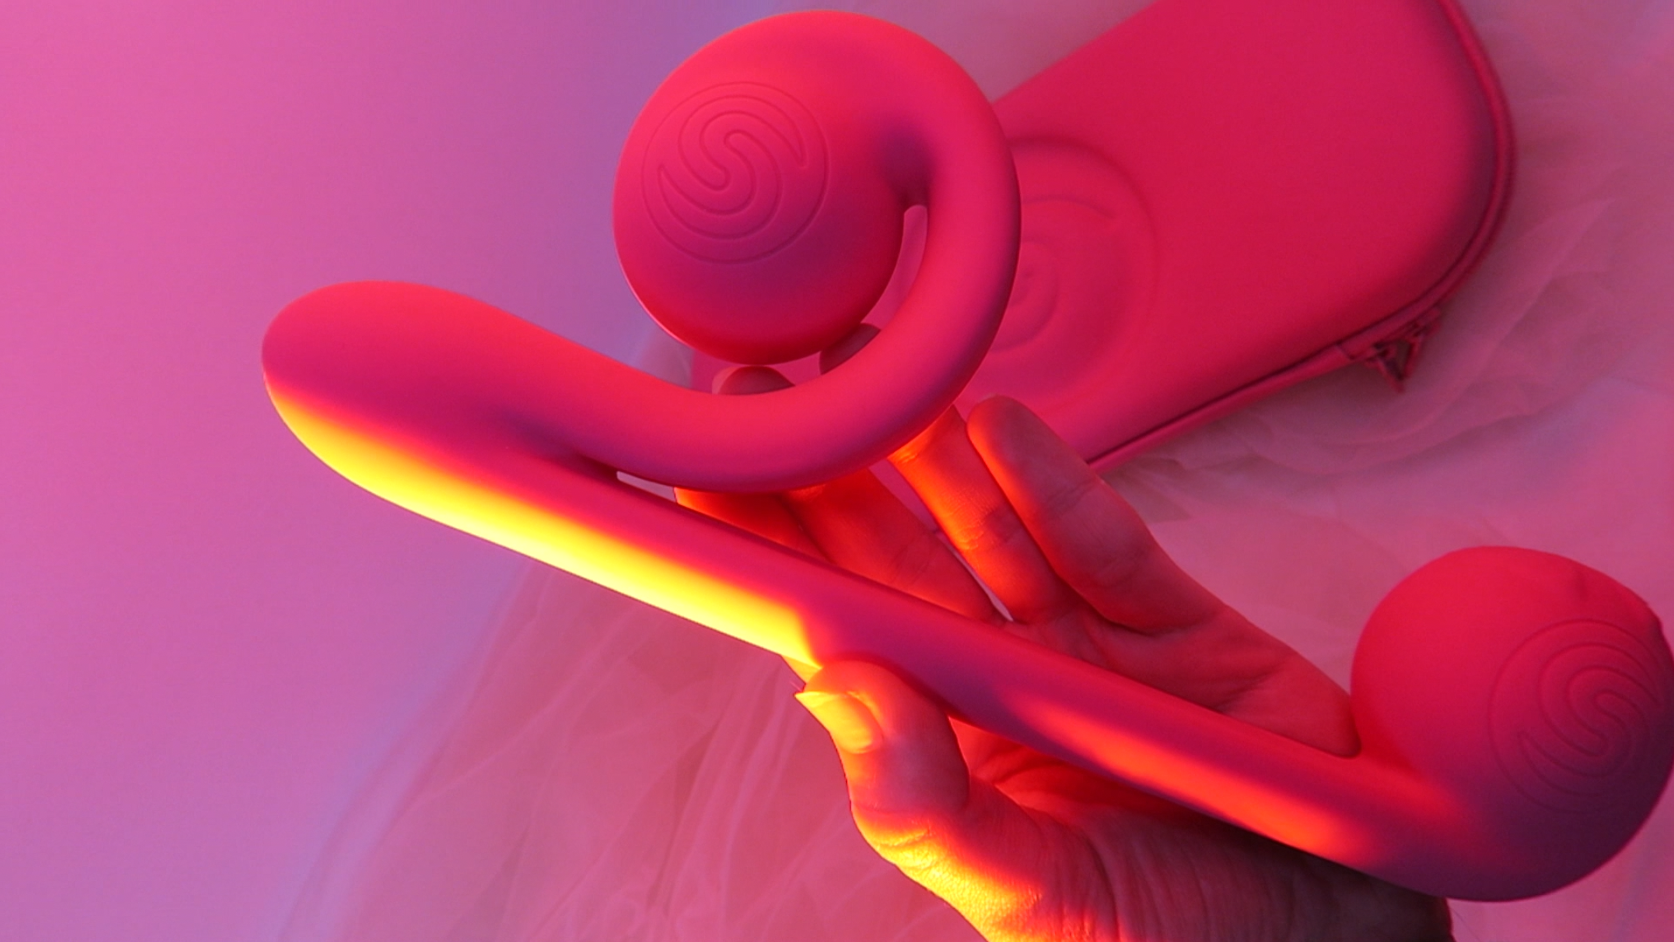 The Snail Vibe hot pink vibrator being held in low, pink lighting.